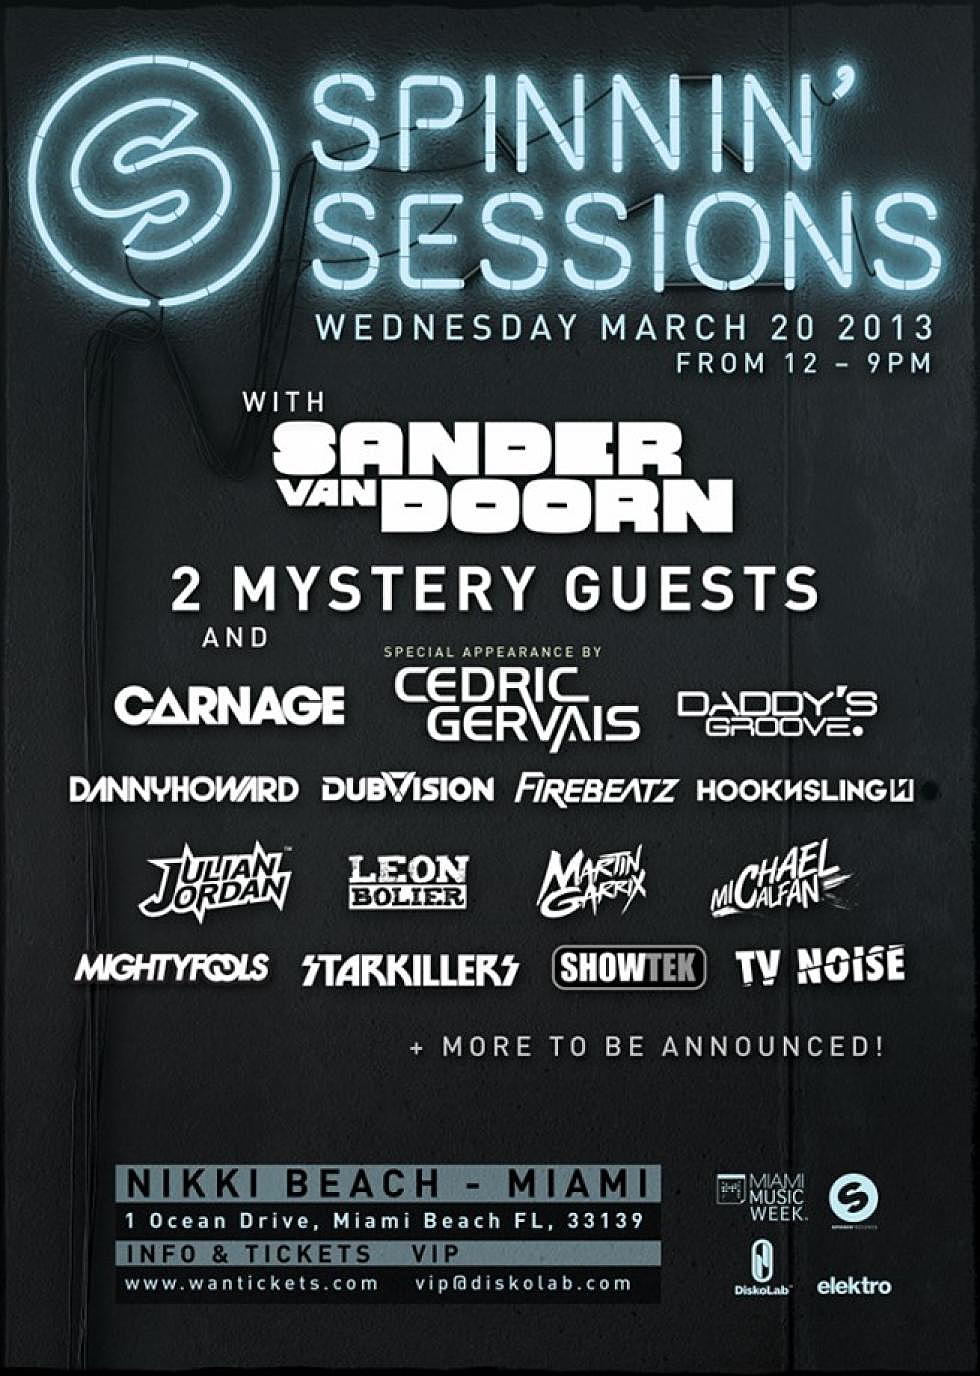 Spinnin Sessions at Nikki Beach March 20